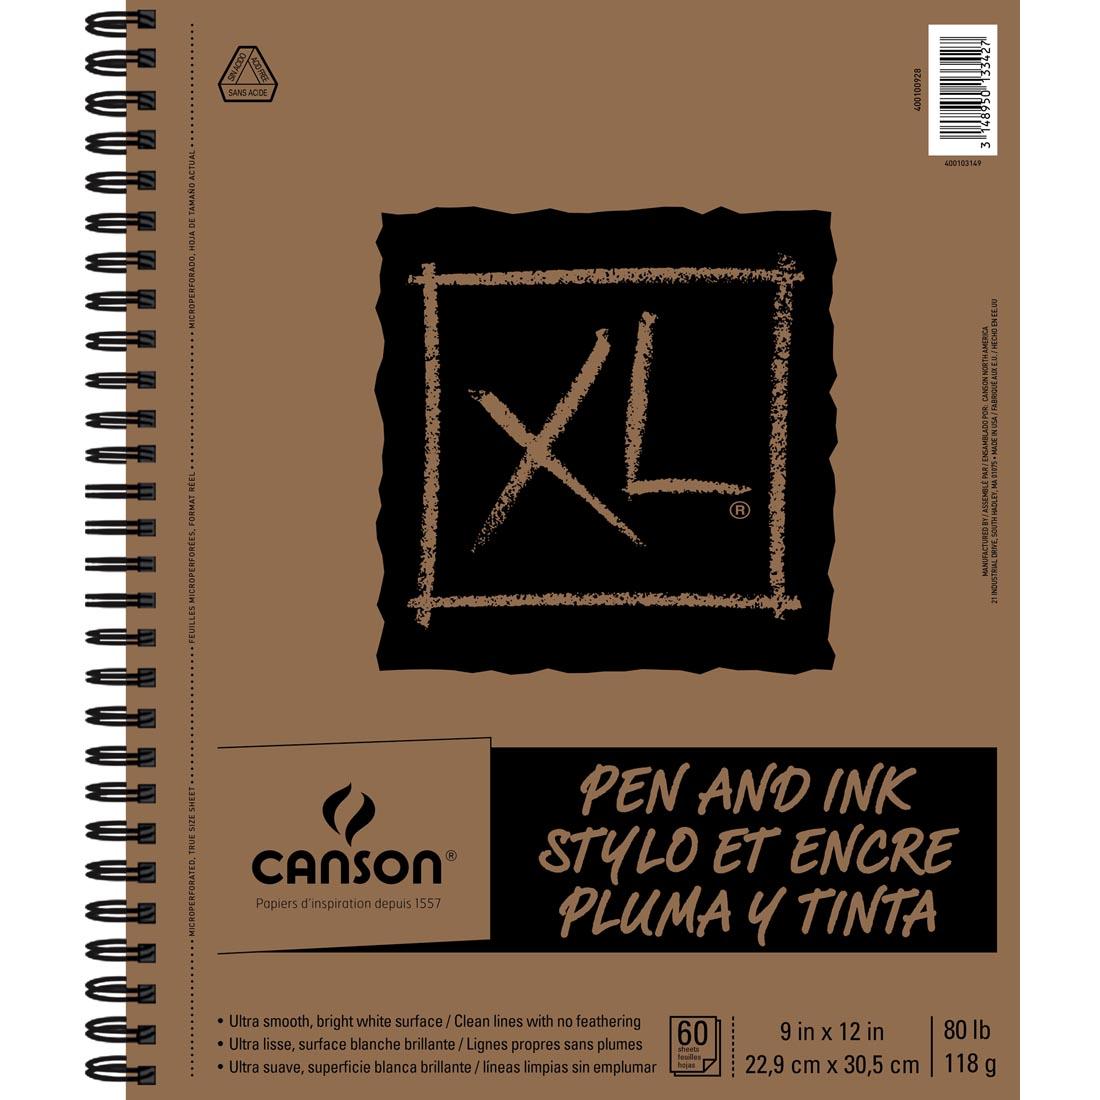 Canson XL Series Pen And Ink Pad